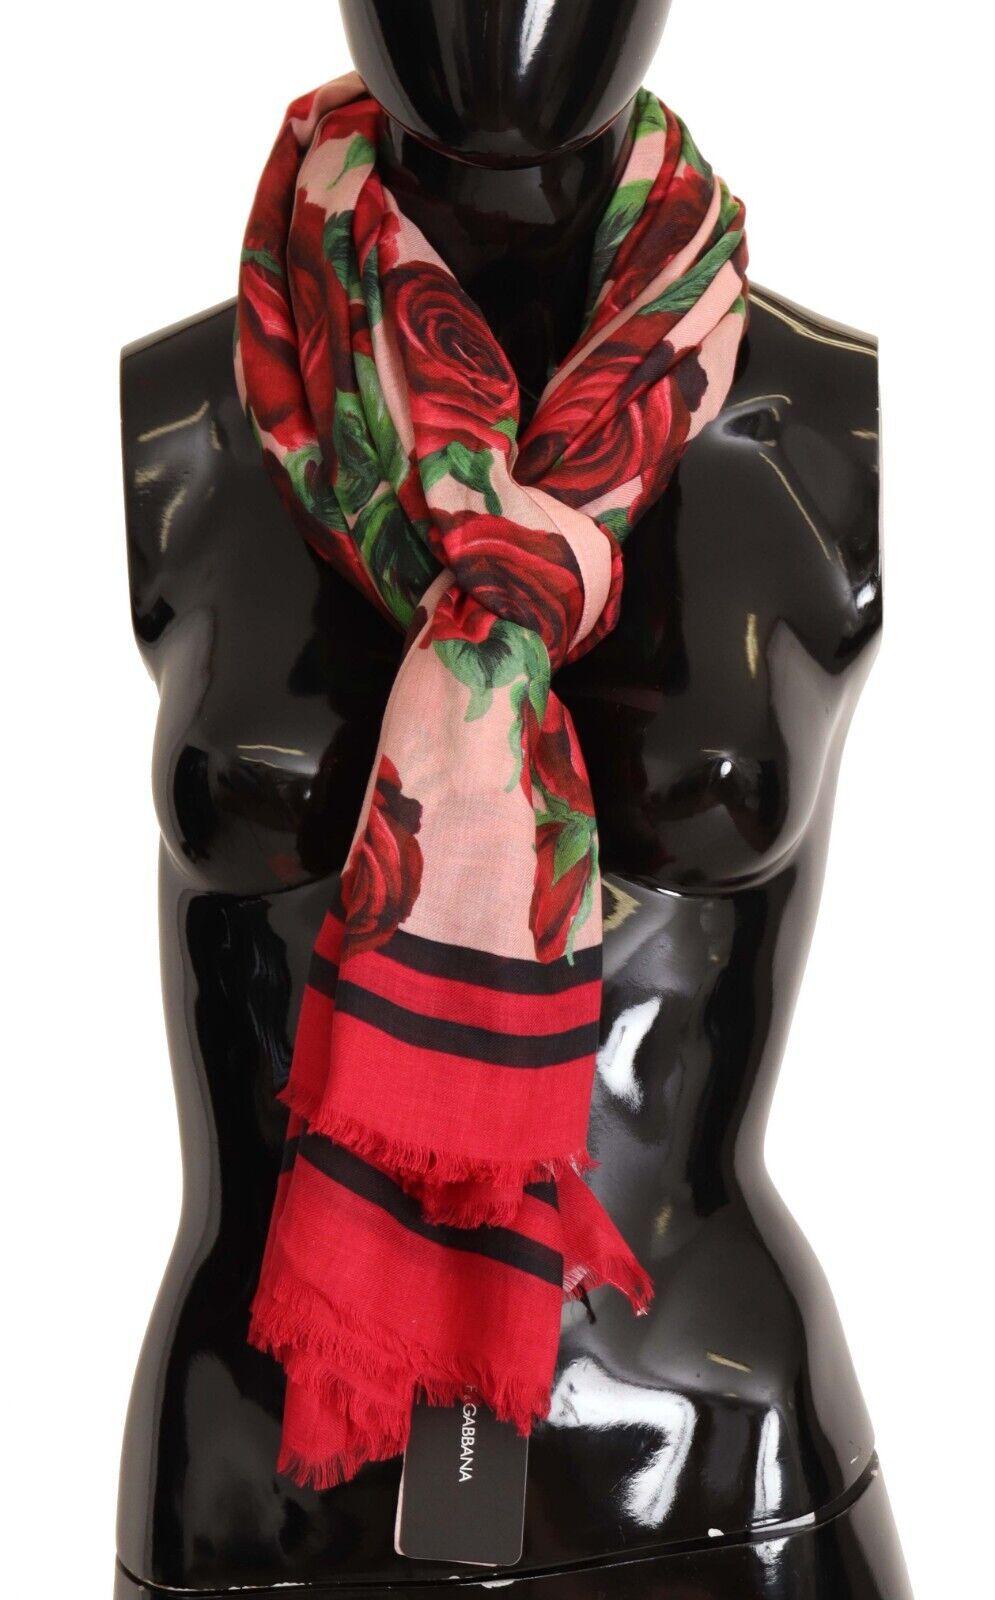 Gorgeous brand new with tags, 100% Authentic Dolce & Gabbana scarf with roses print crafted from cashmere and modal blend.

Gender: Women
Color: Multicolor roses print

Material: 90% Modal 10% Cashmere
Logo details
Made in Italy

Size: 140cm x